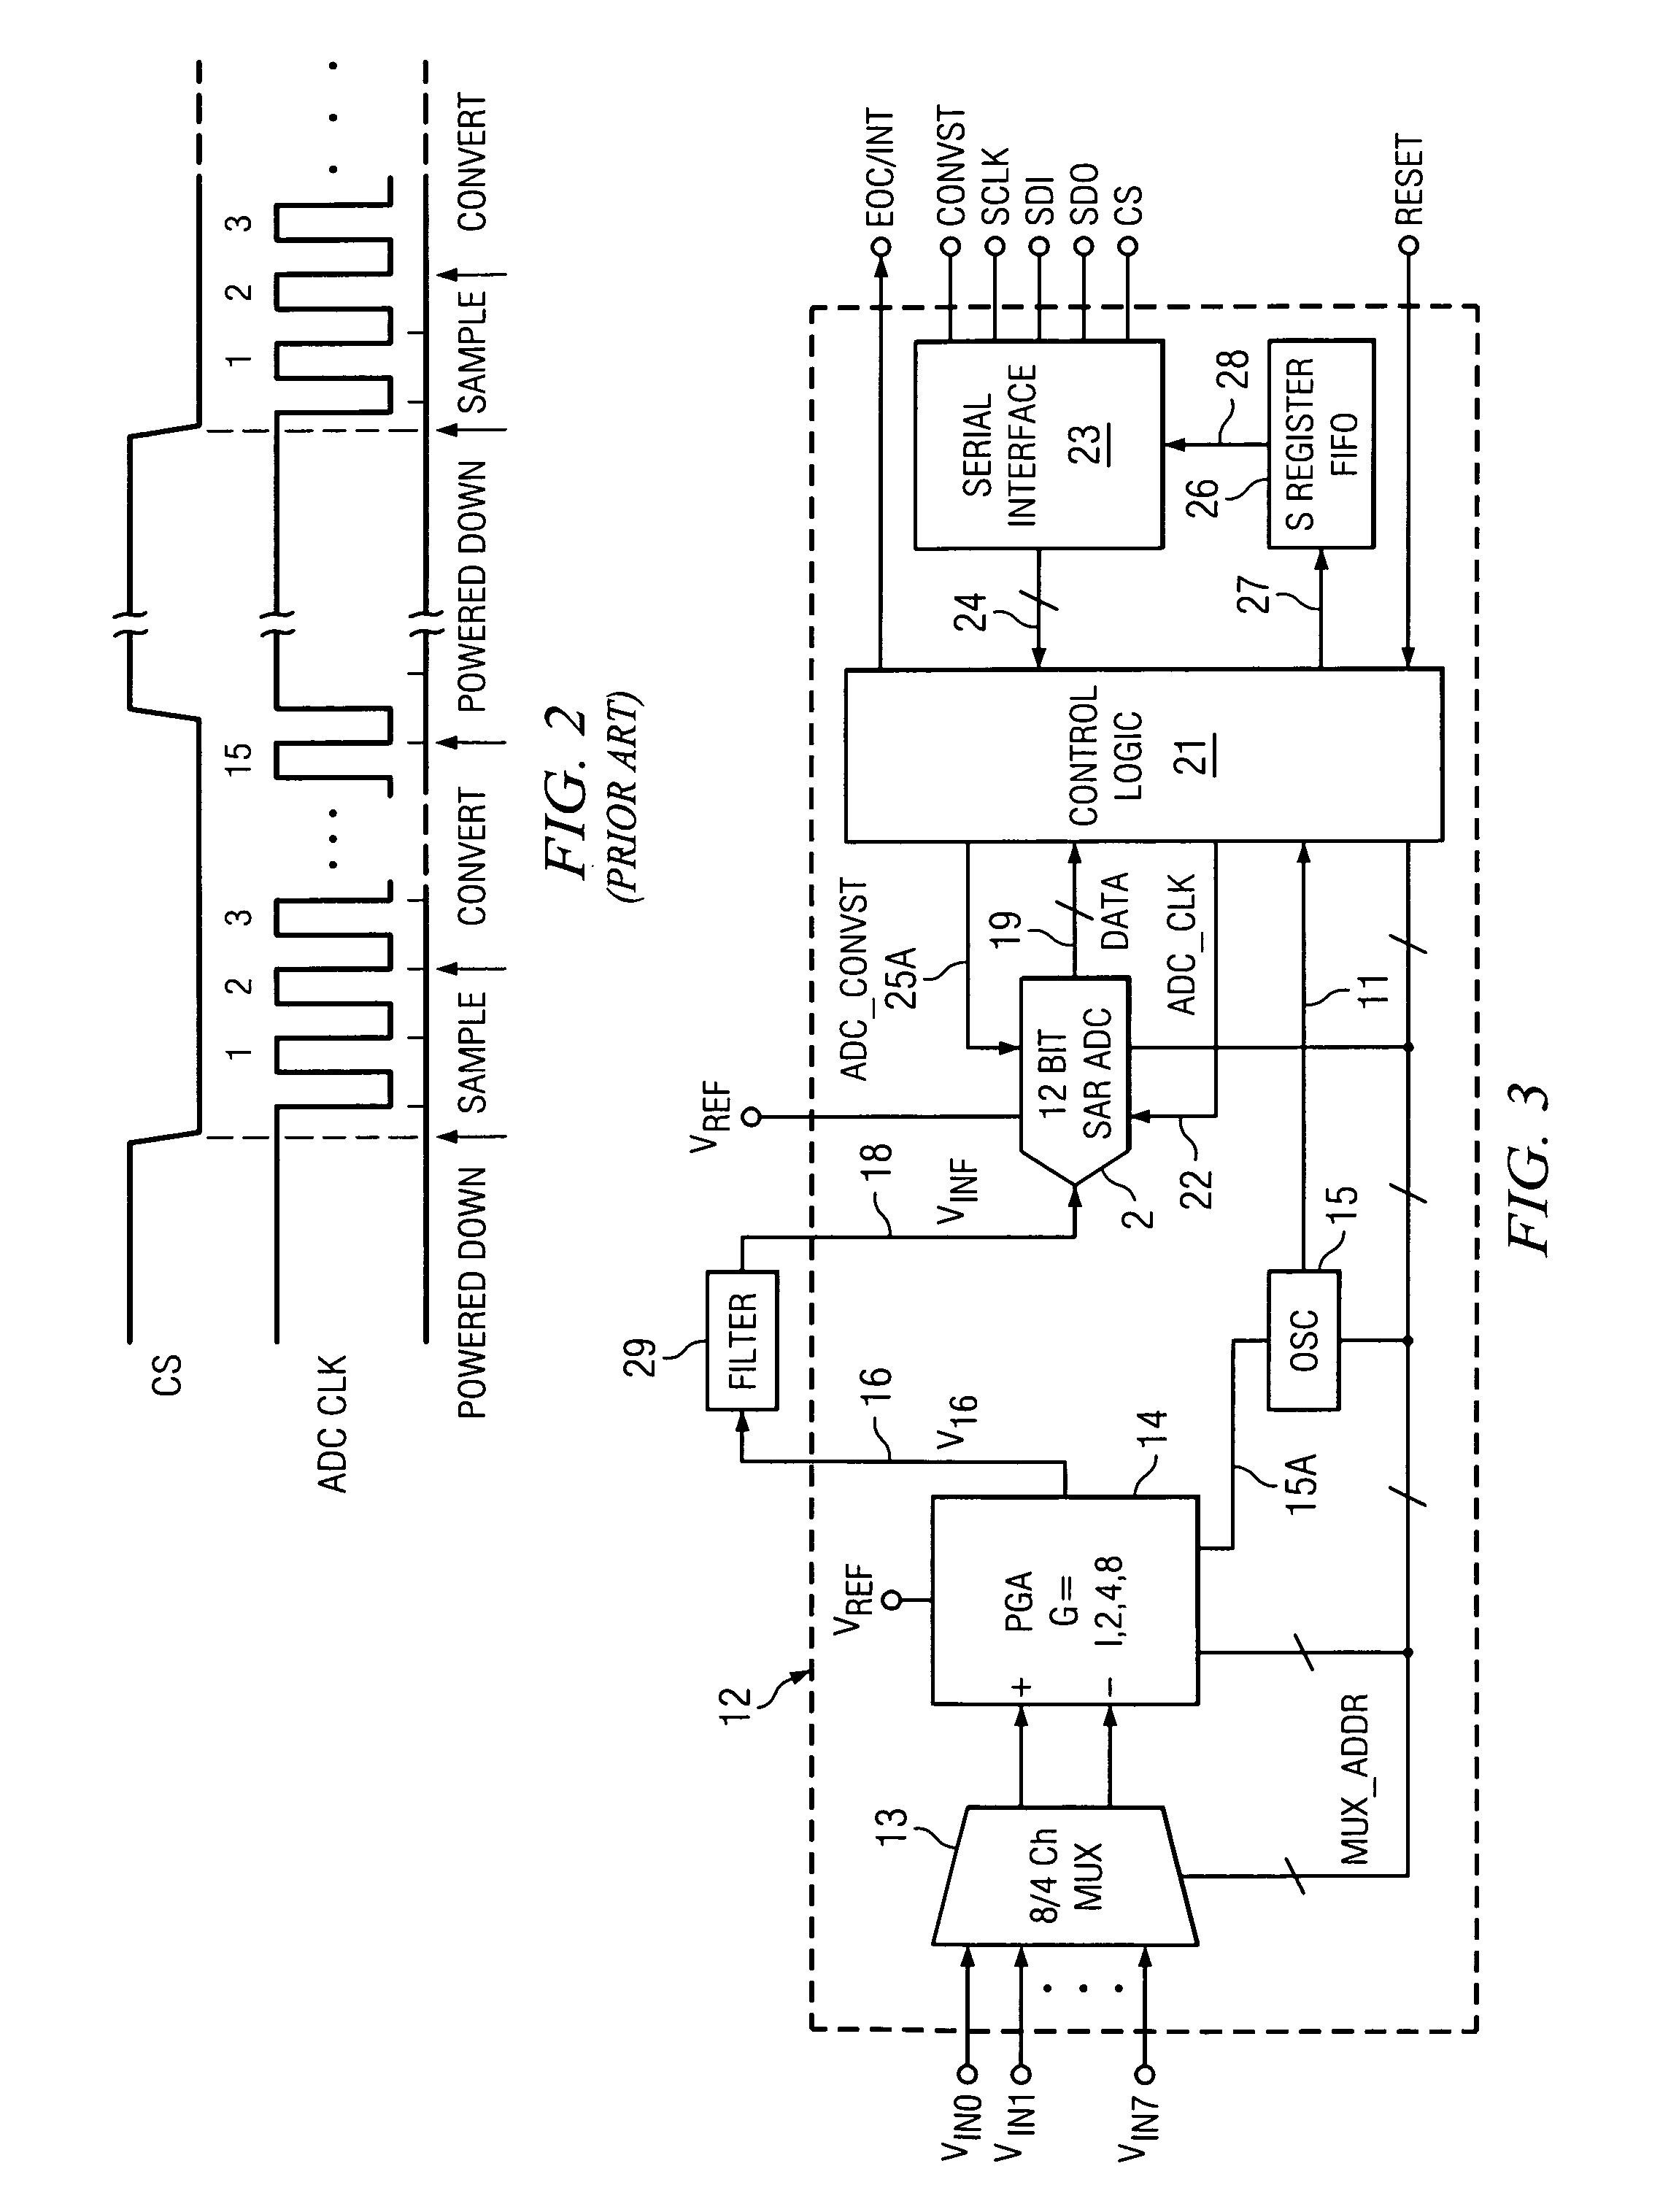 Low power, high speed multi-channel data acquisition system and method